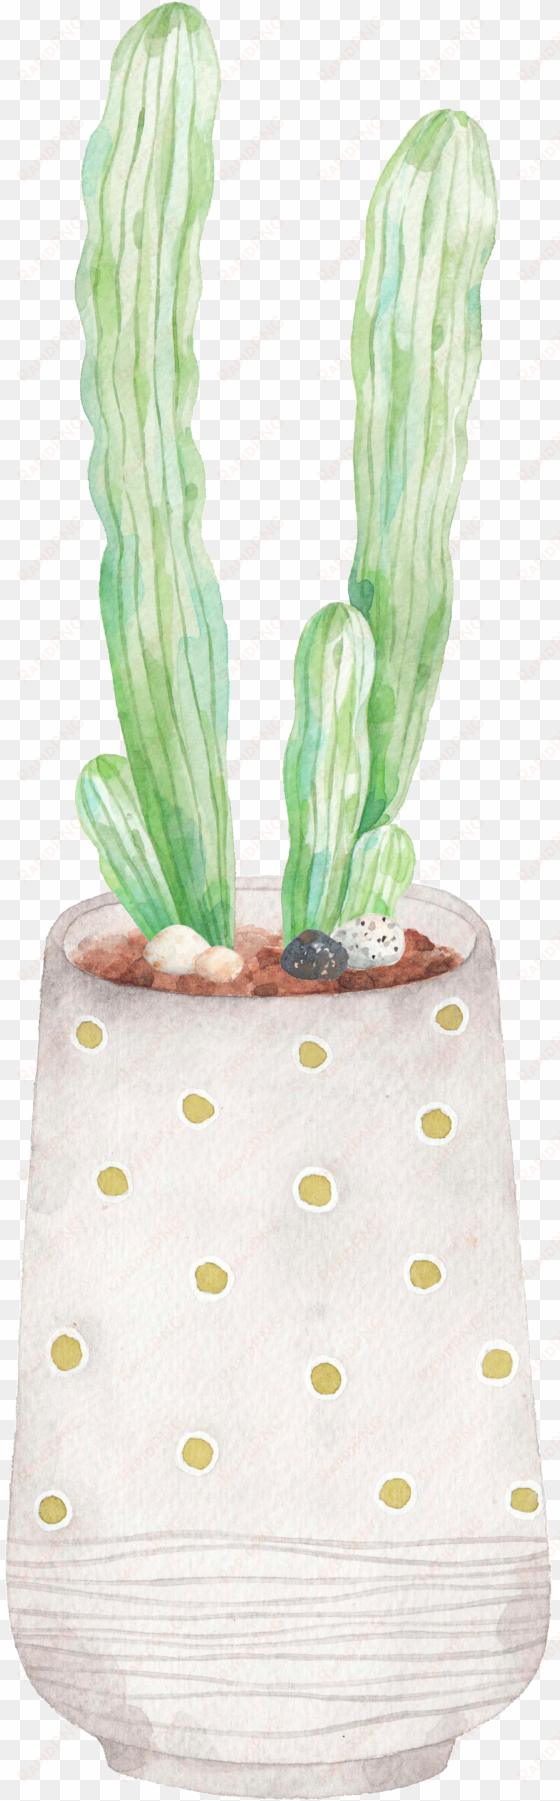 hand painted a plate of dragon god png transparent - cactus png transparent